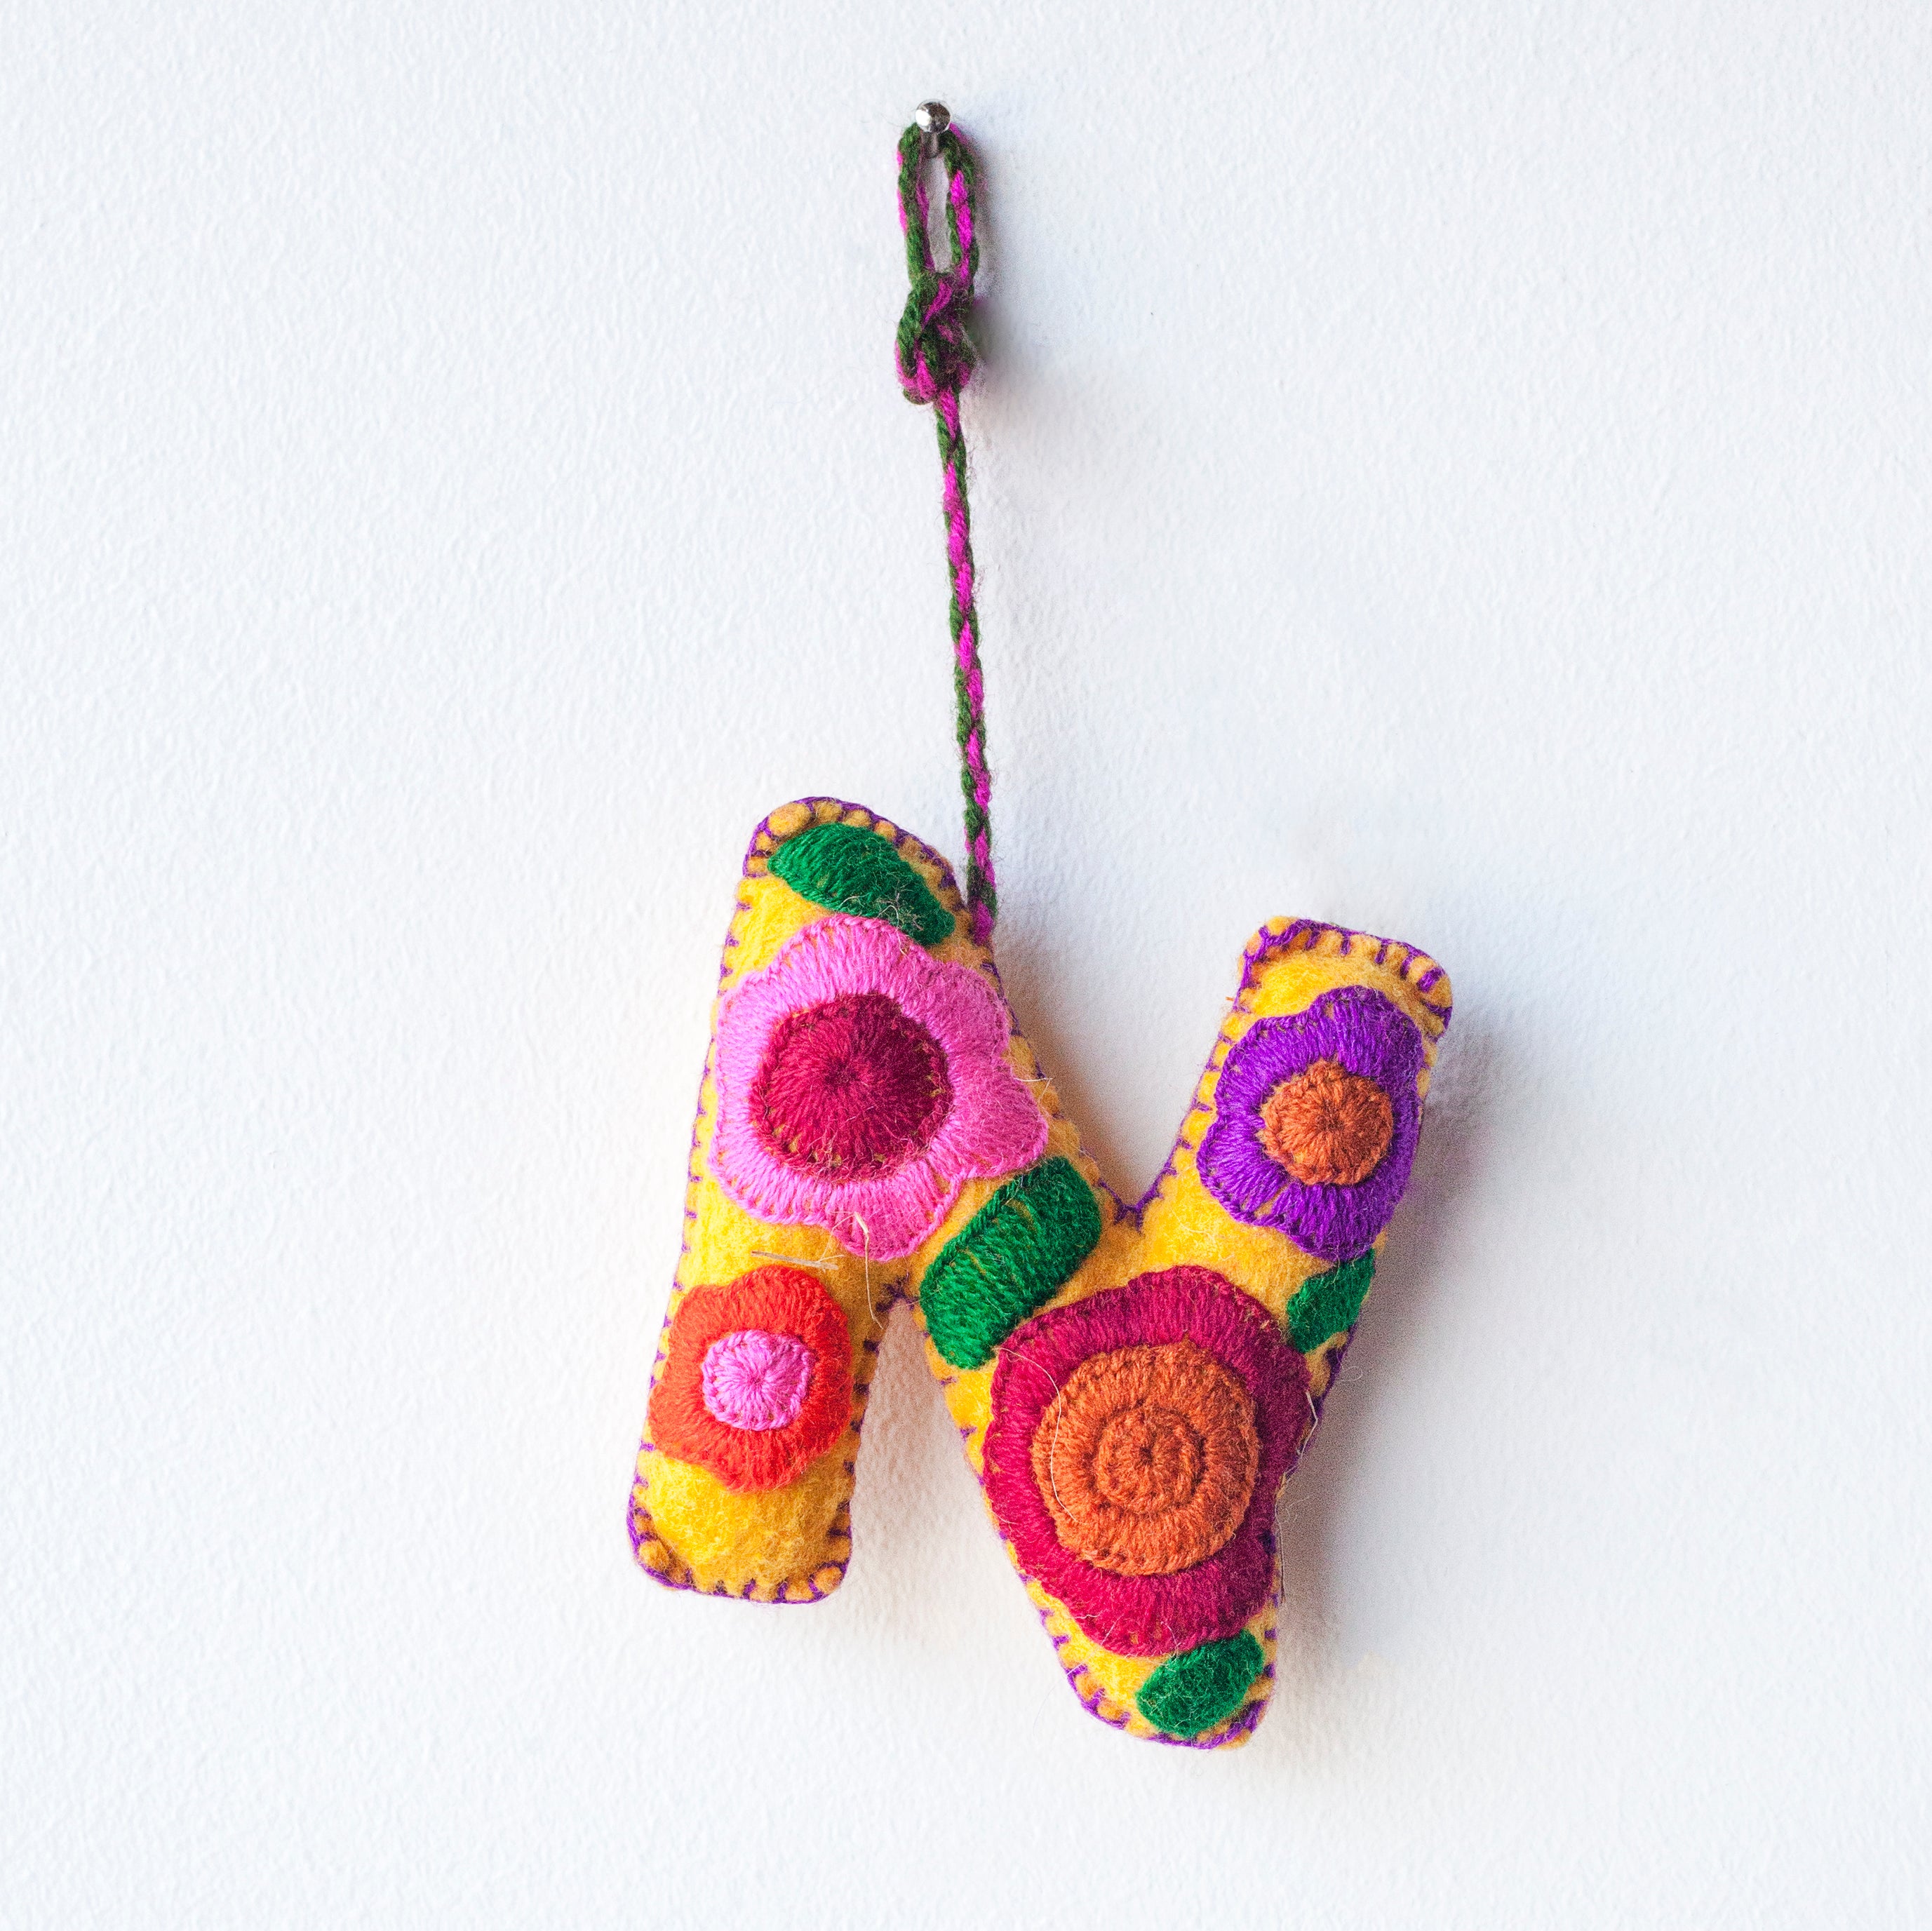 Colorful felt letter "N" with multicolor floral hand-embroidery hanging by a colorful string.